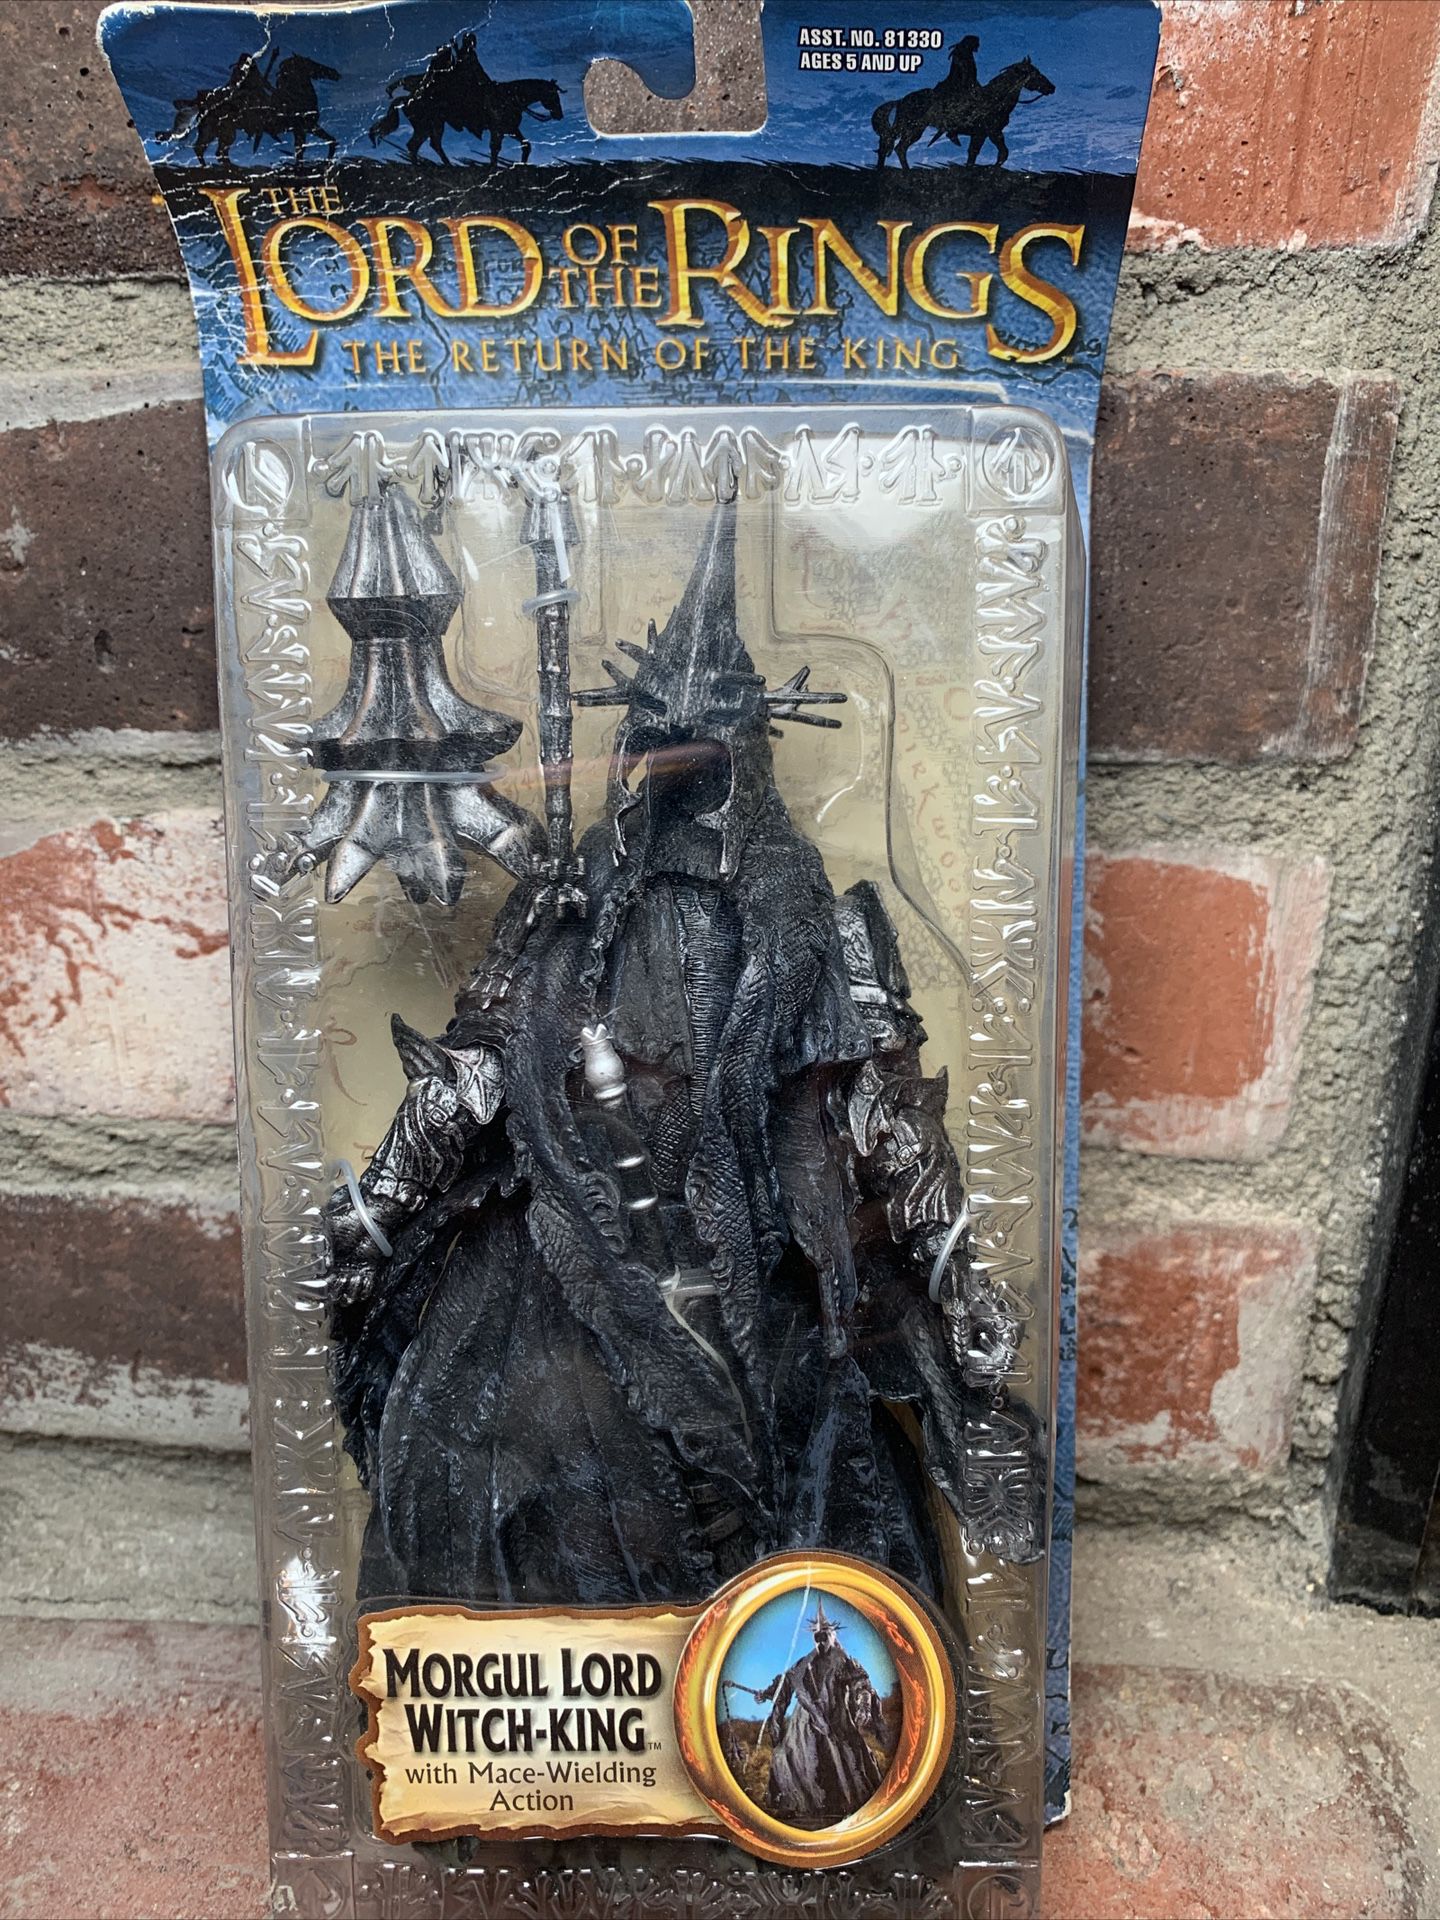 ToyBiz The Lord of the Rings: The Return of the King - Morgul Lord Witch-King 🔥